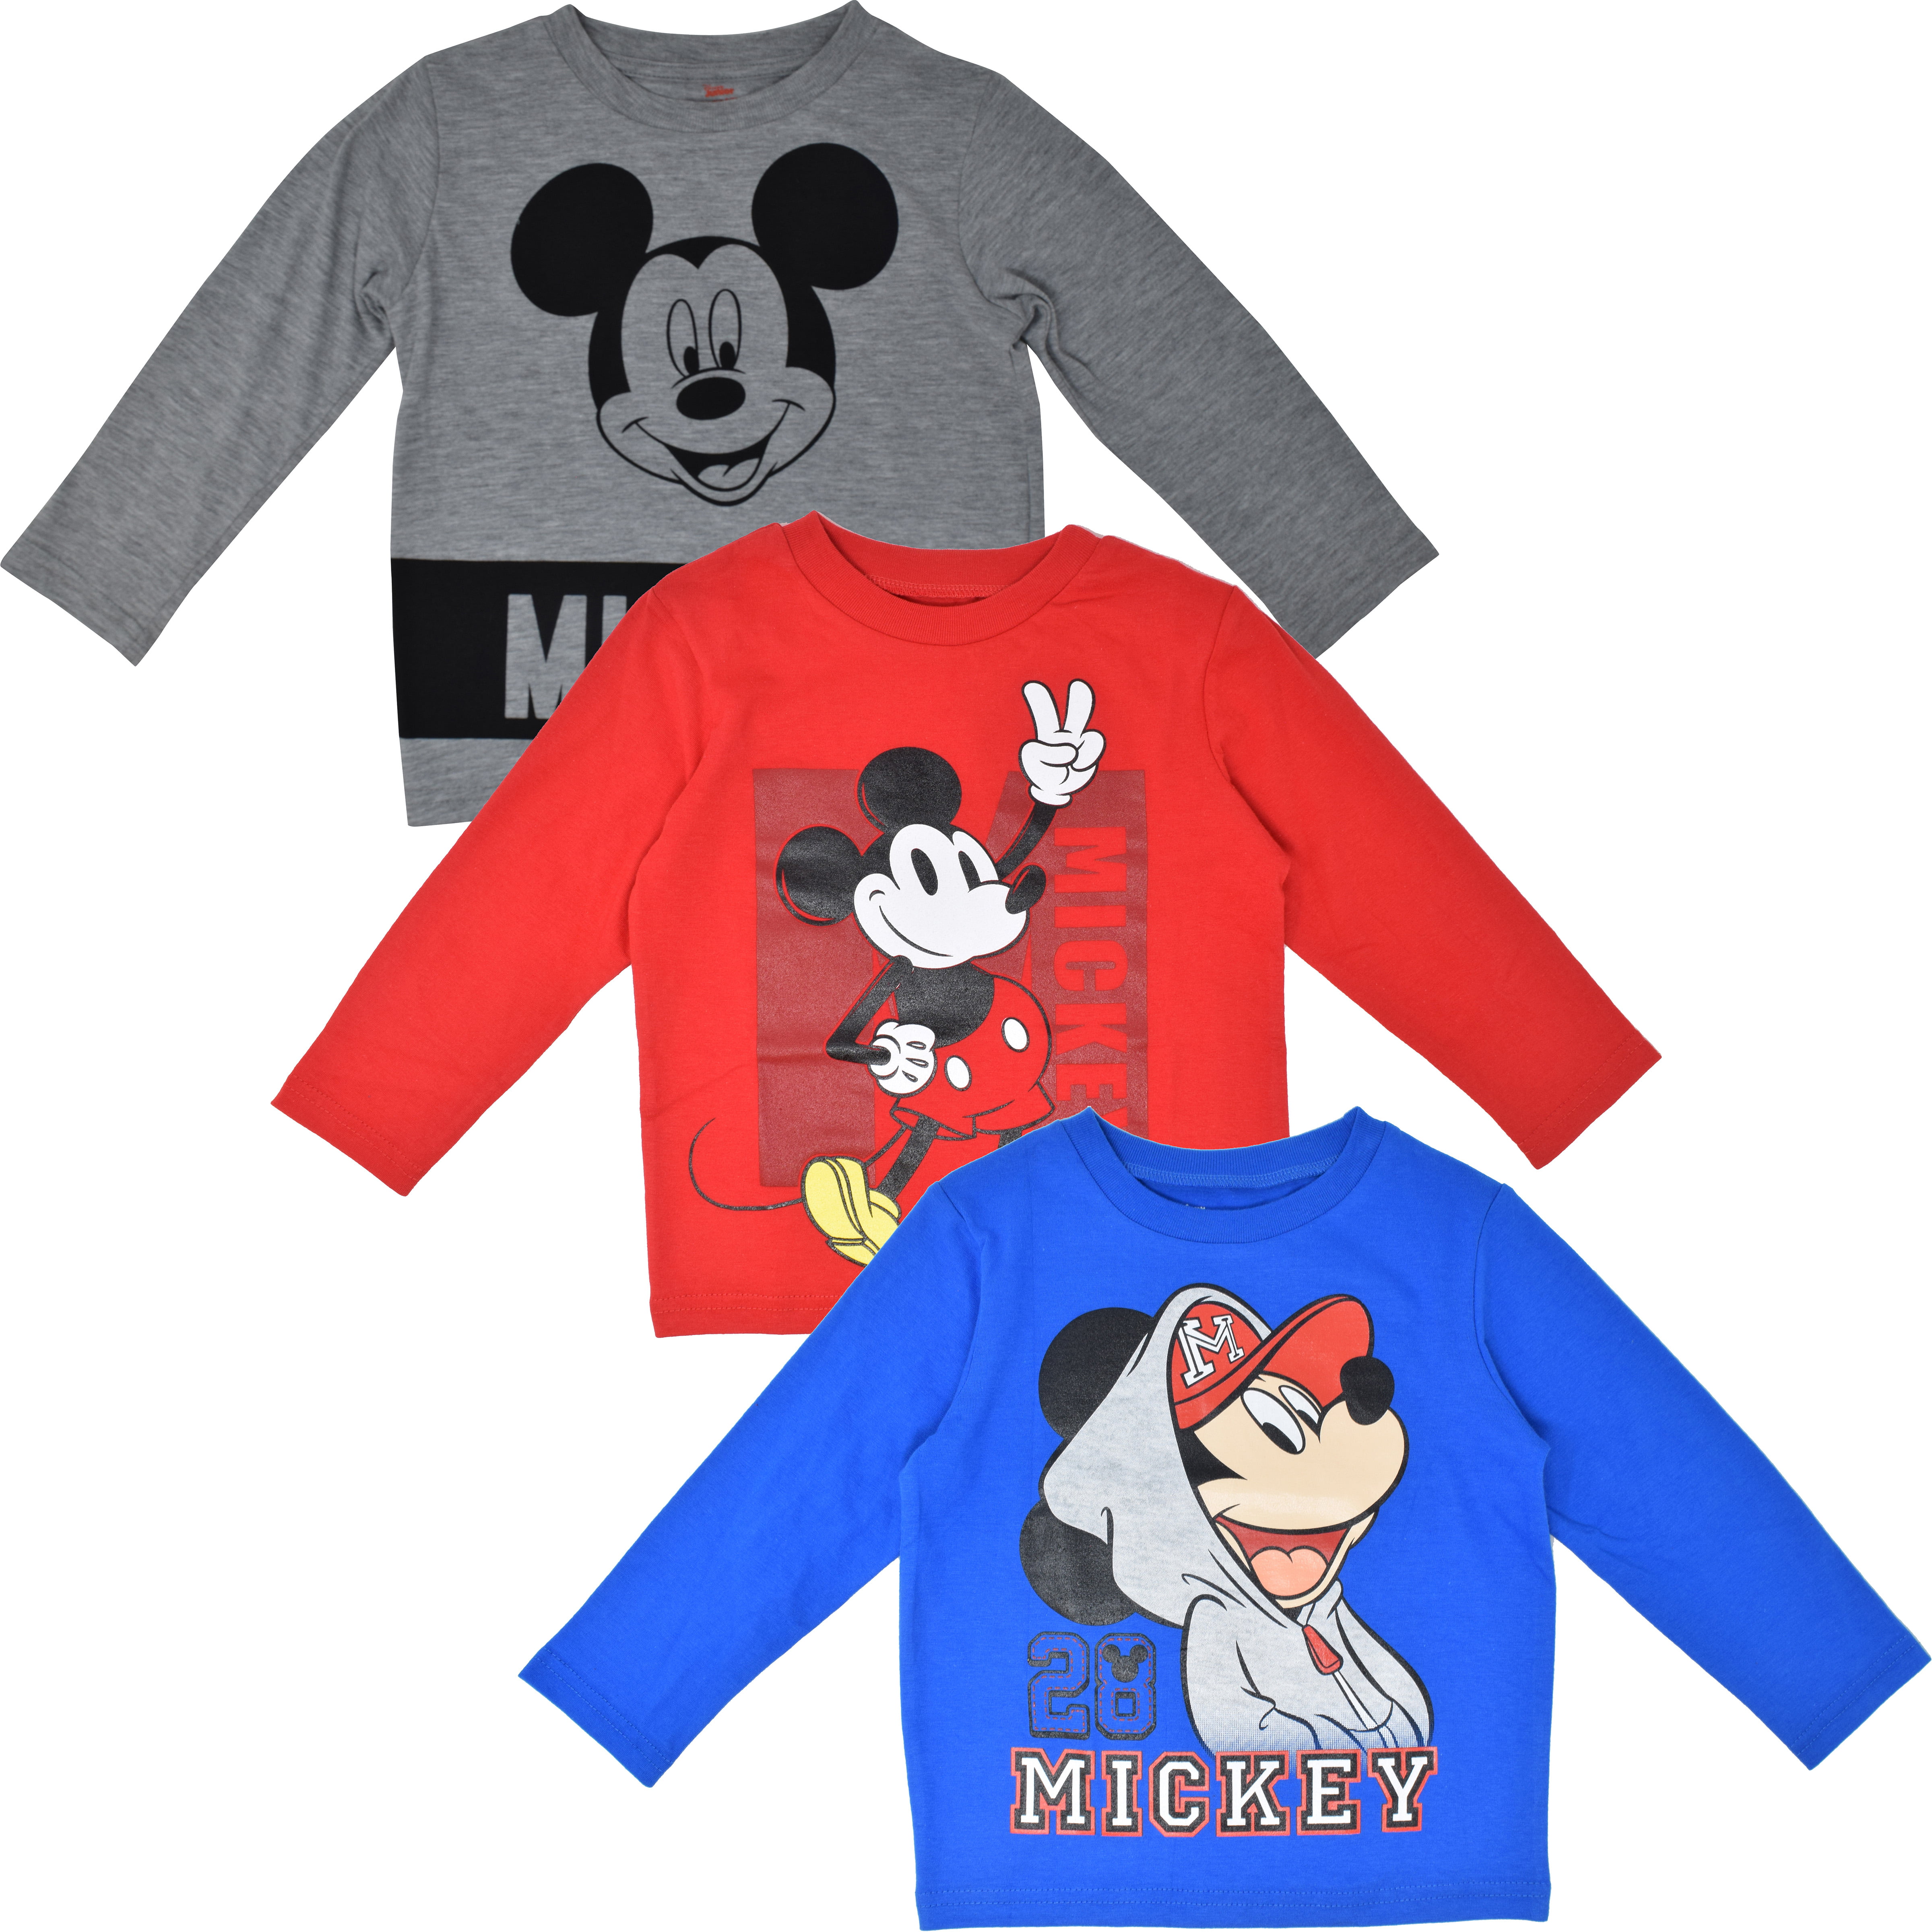 3-Pack Mickey Mouse Clubhouse T-Shirt Size 4T 